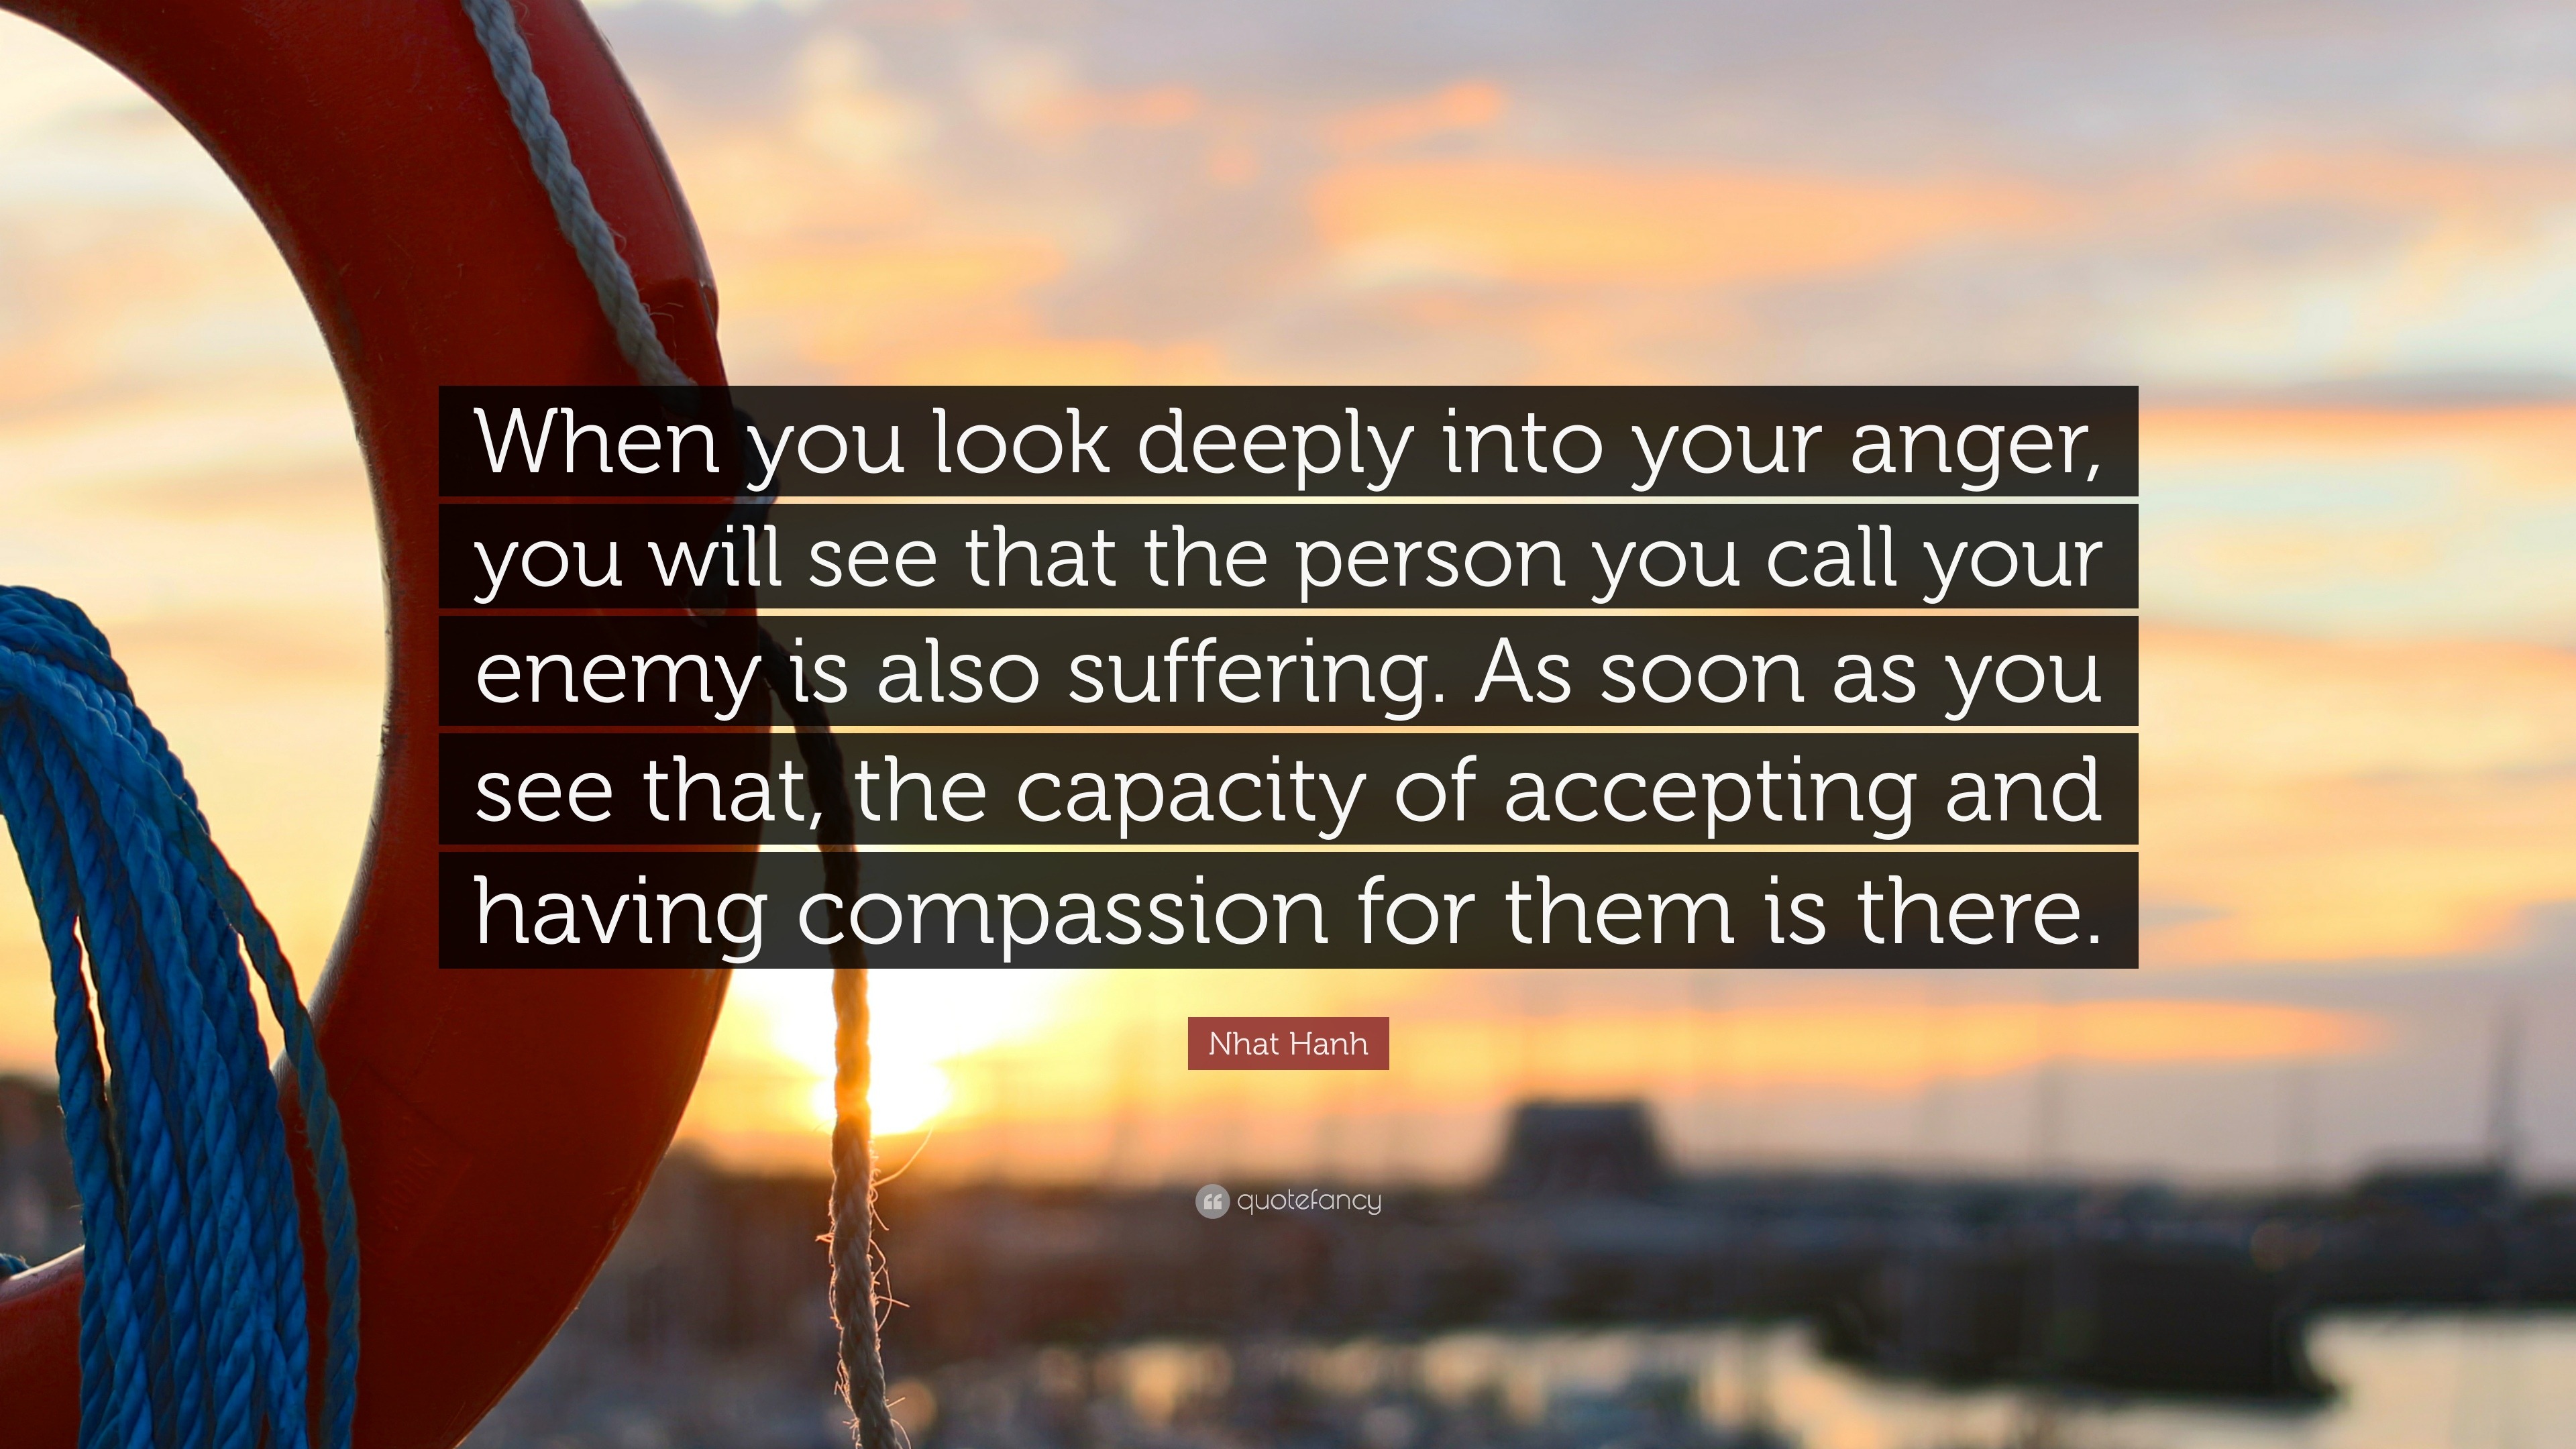 Nhat Hanh Quote “When you look deeply into your anger you will see